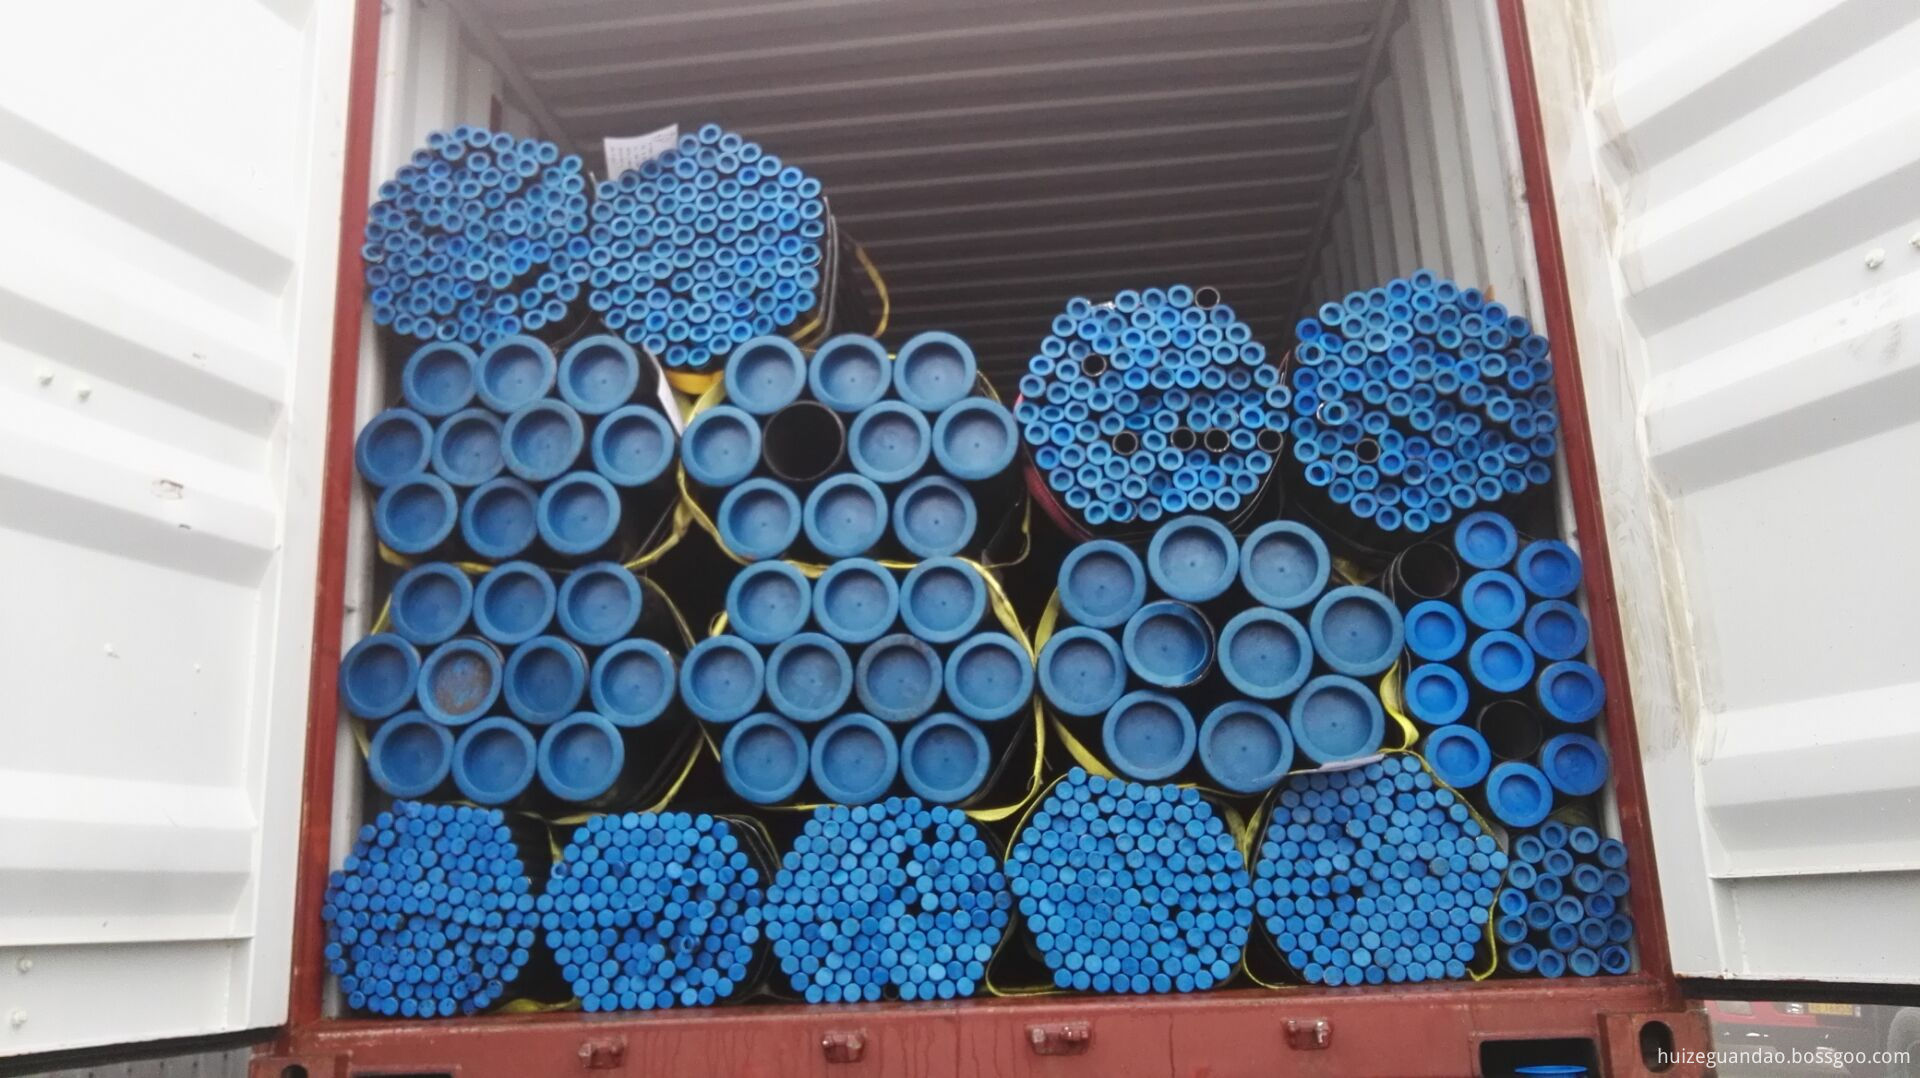 Seamless Alloy Steel Pipe